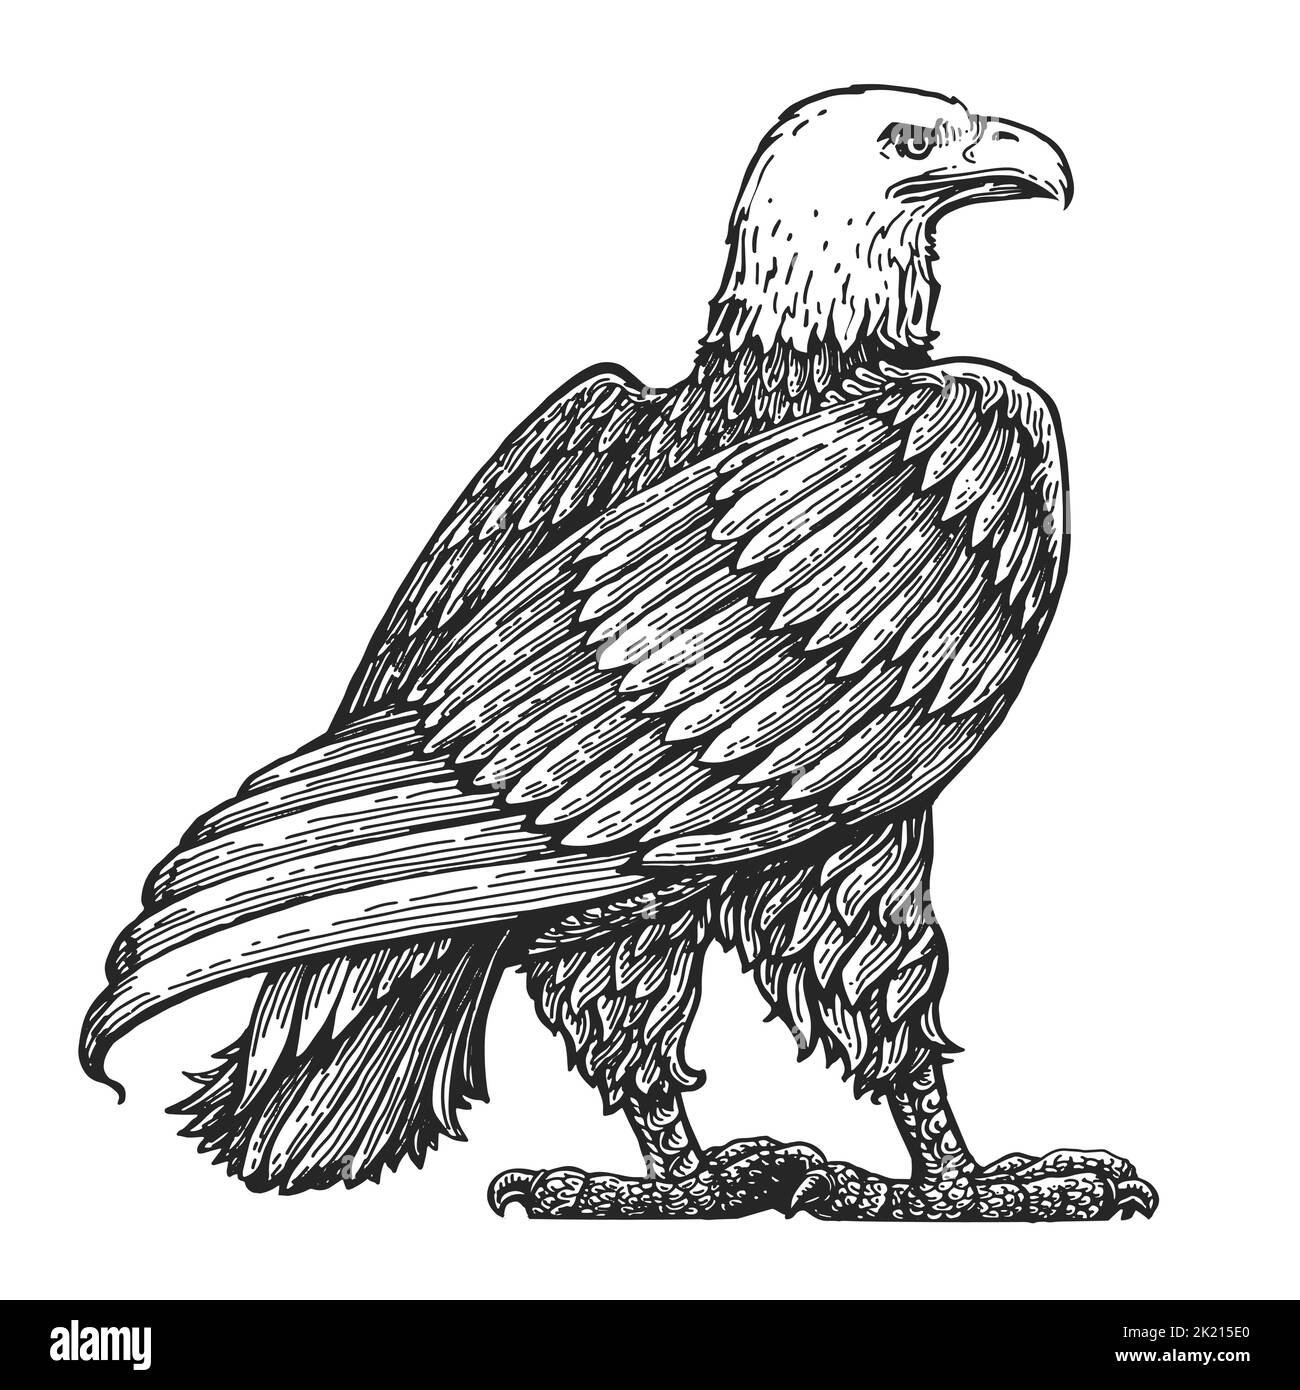 Bald Eagle standing life size isolated on white. Hand drawn sketch bird vector illustration in vintage engraving style Stock Vector